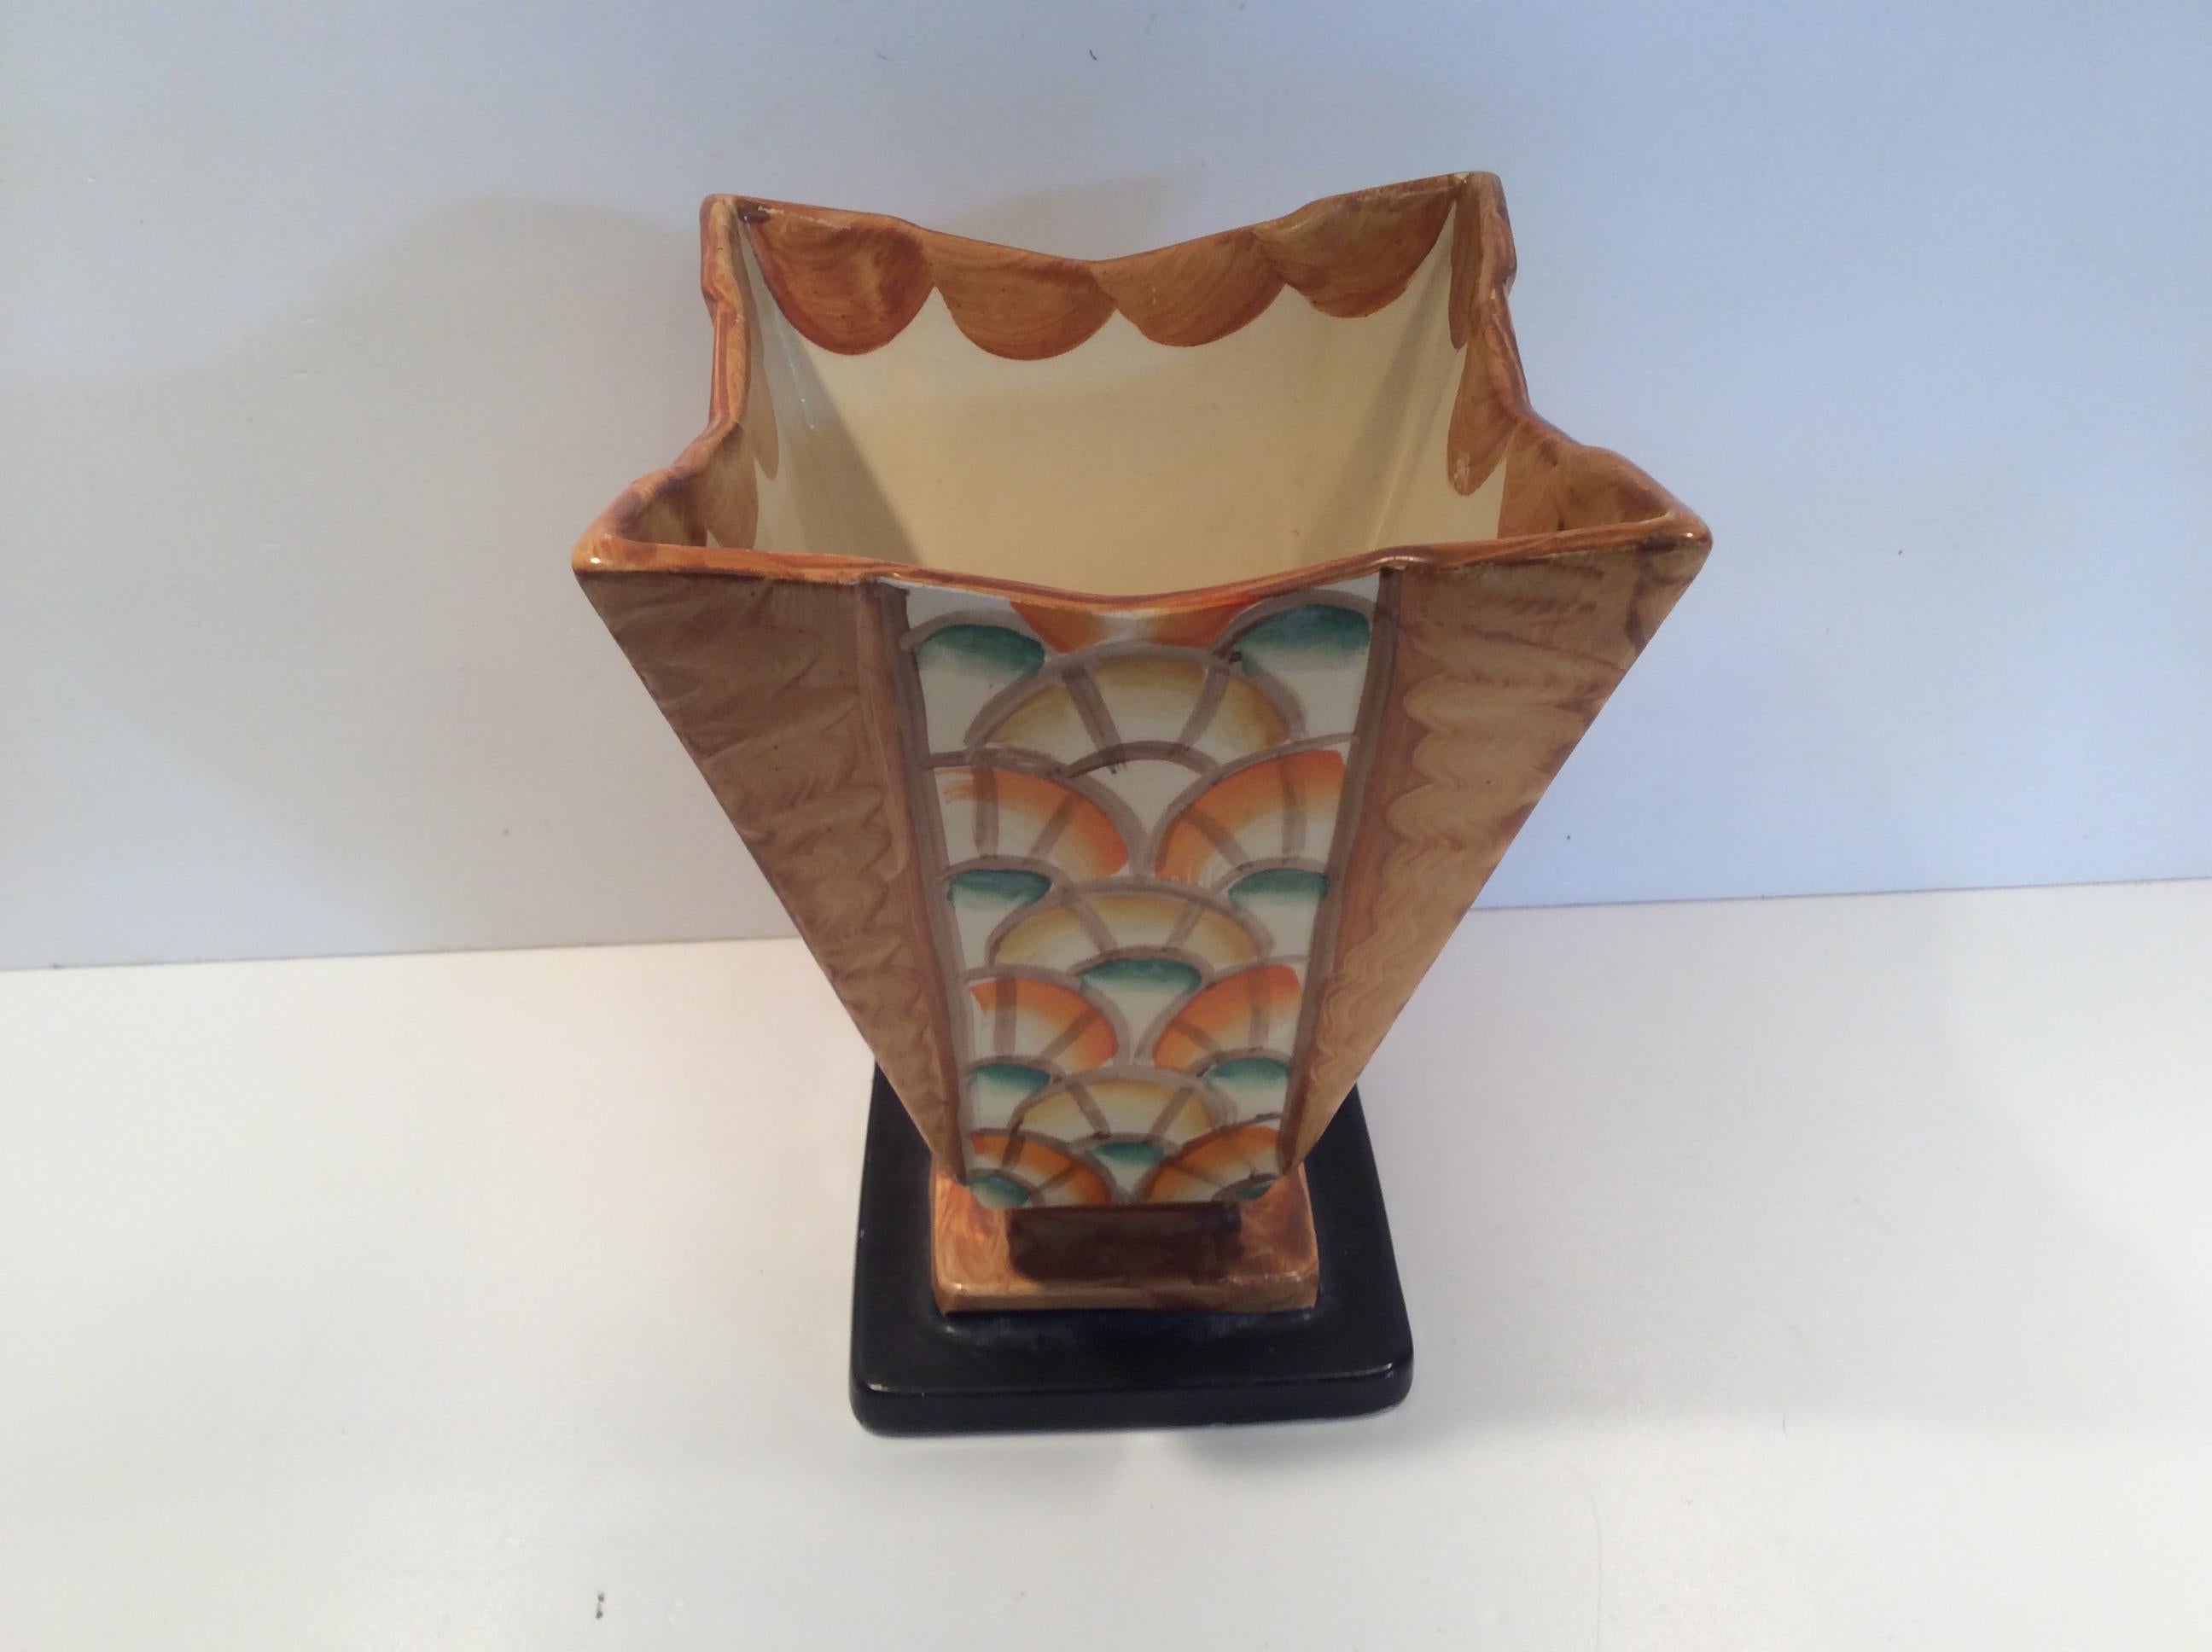 Hand-painted Art Deco vase designed and produced by Myott and son.
Measures: 18 cm H, 14 cm W, 12 cm D.
British, circa 1930.